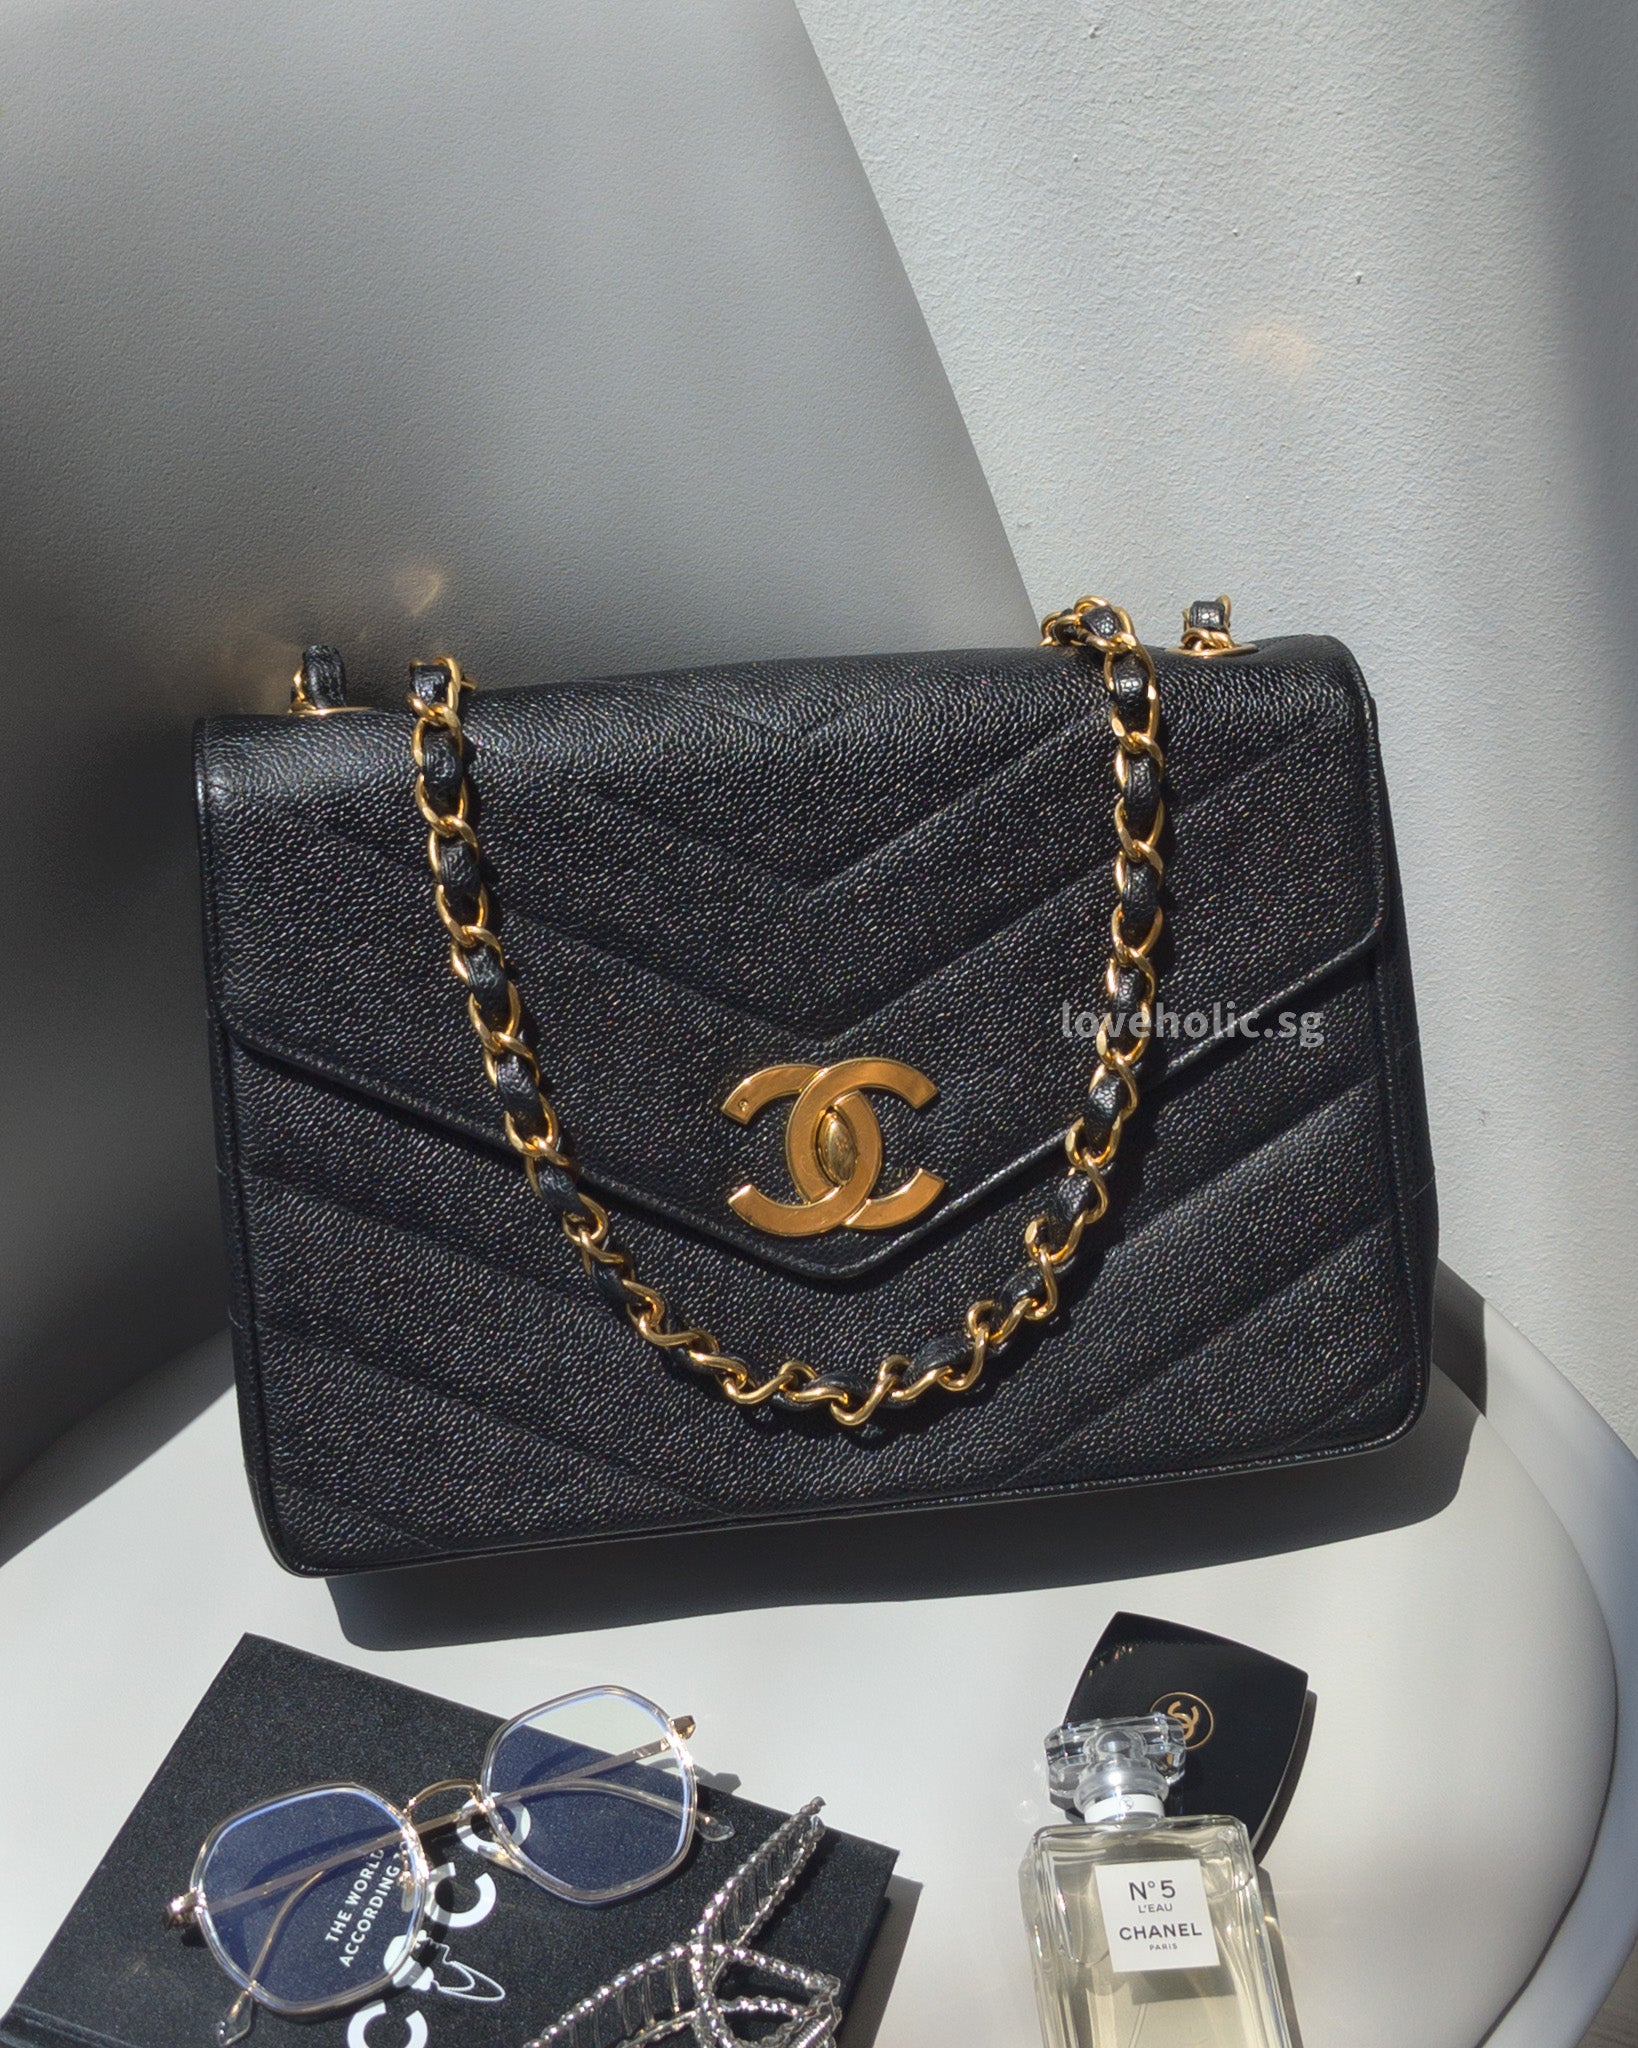 Chanel - authentic luxury pieces curated by Loveholic – Page 3 – loveholic